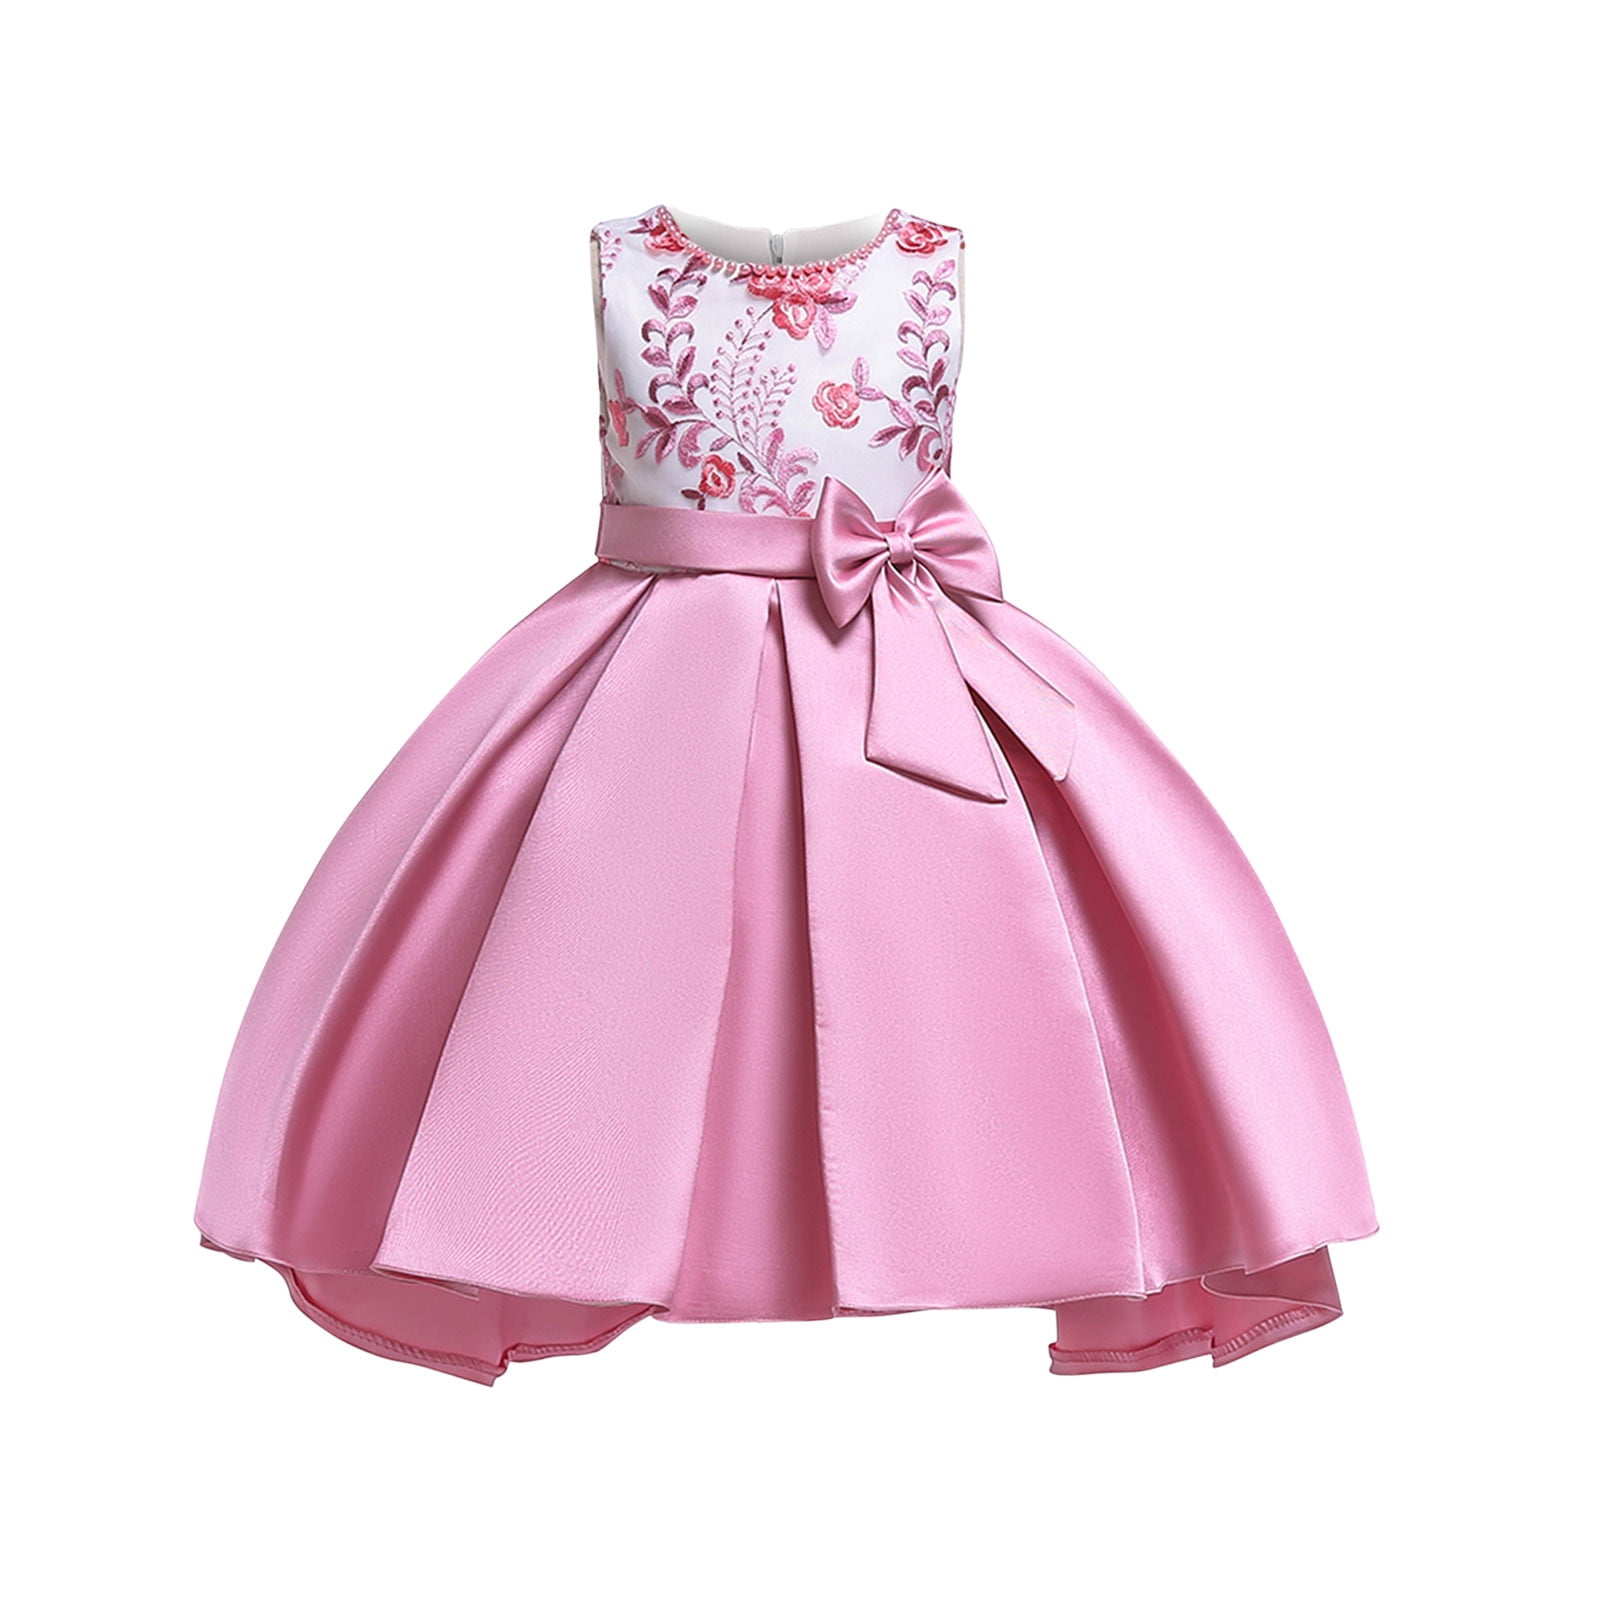 Dress Girl Party Pink Elegant | Pink Party Gowns Dress Girls | Pink Party  Dresses Kids - Girls Party Dresses - Aliexpress